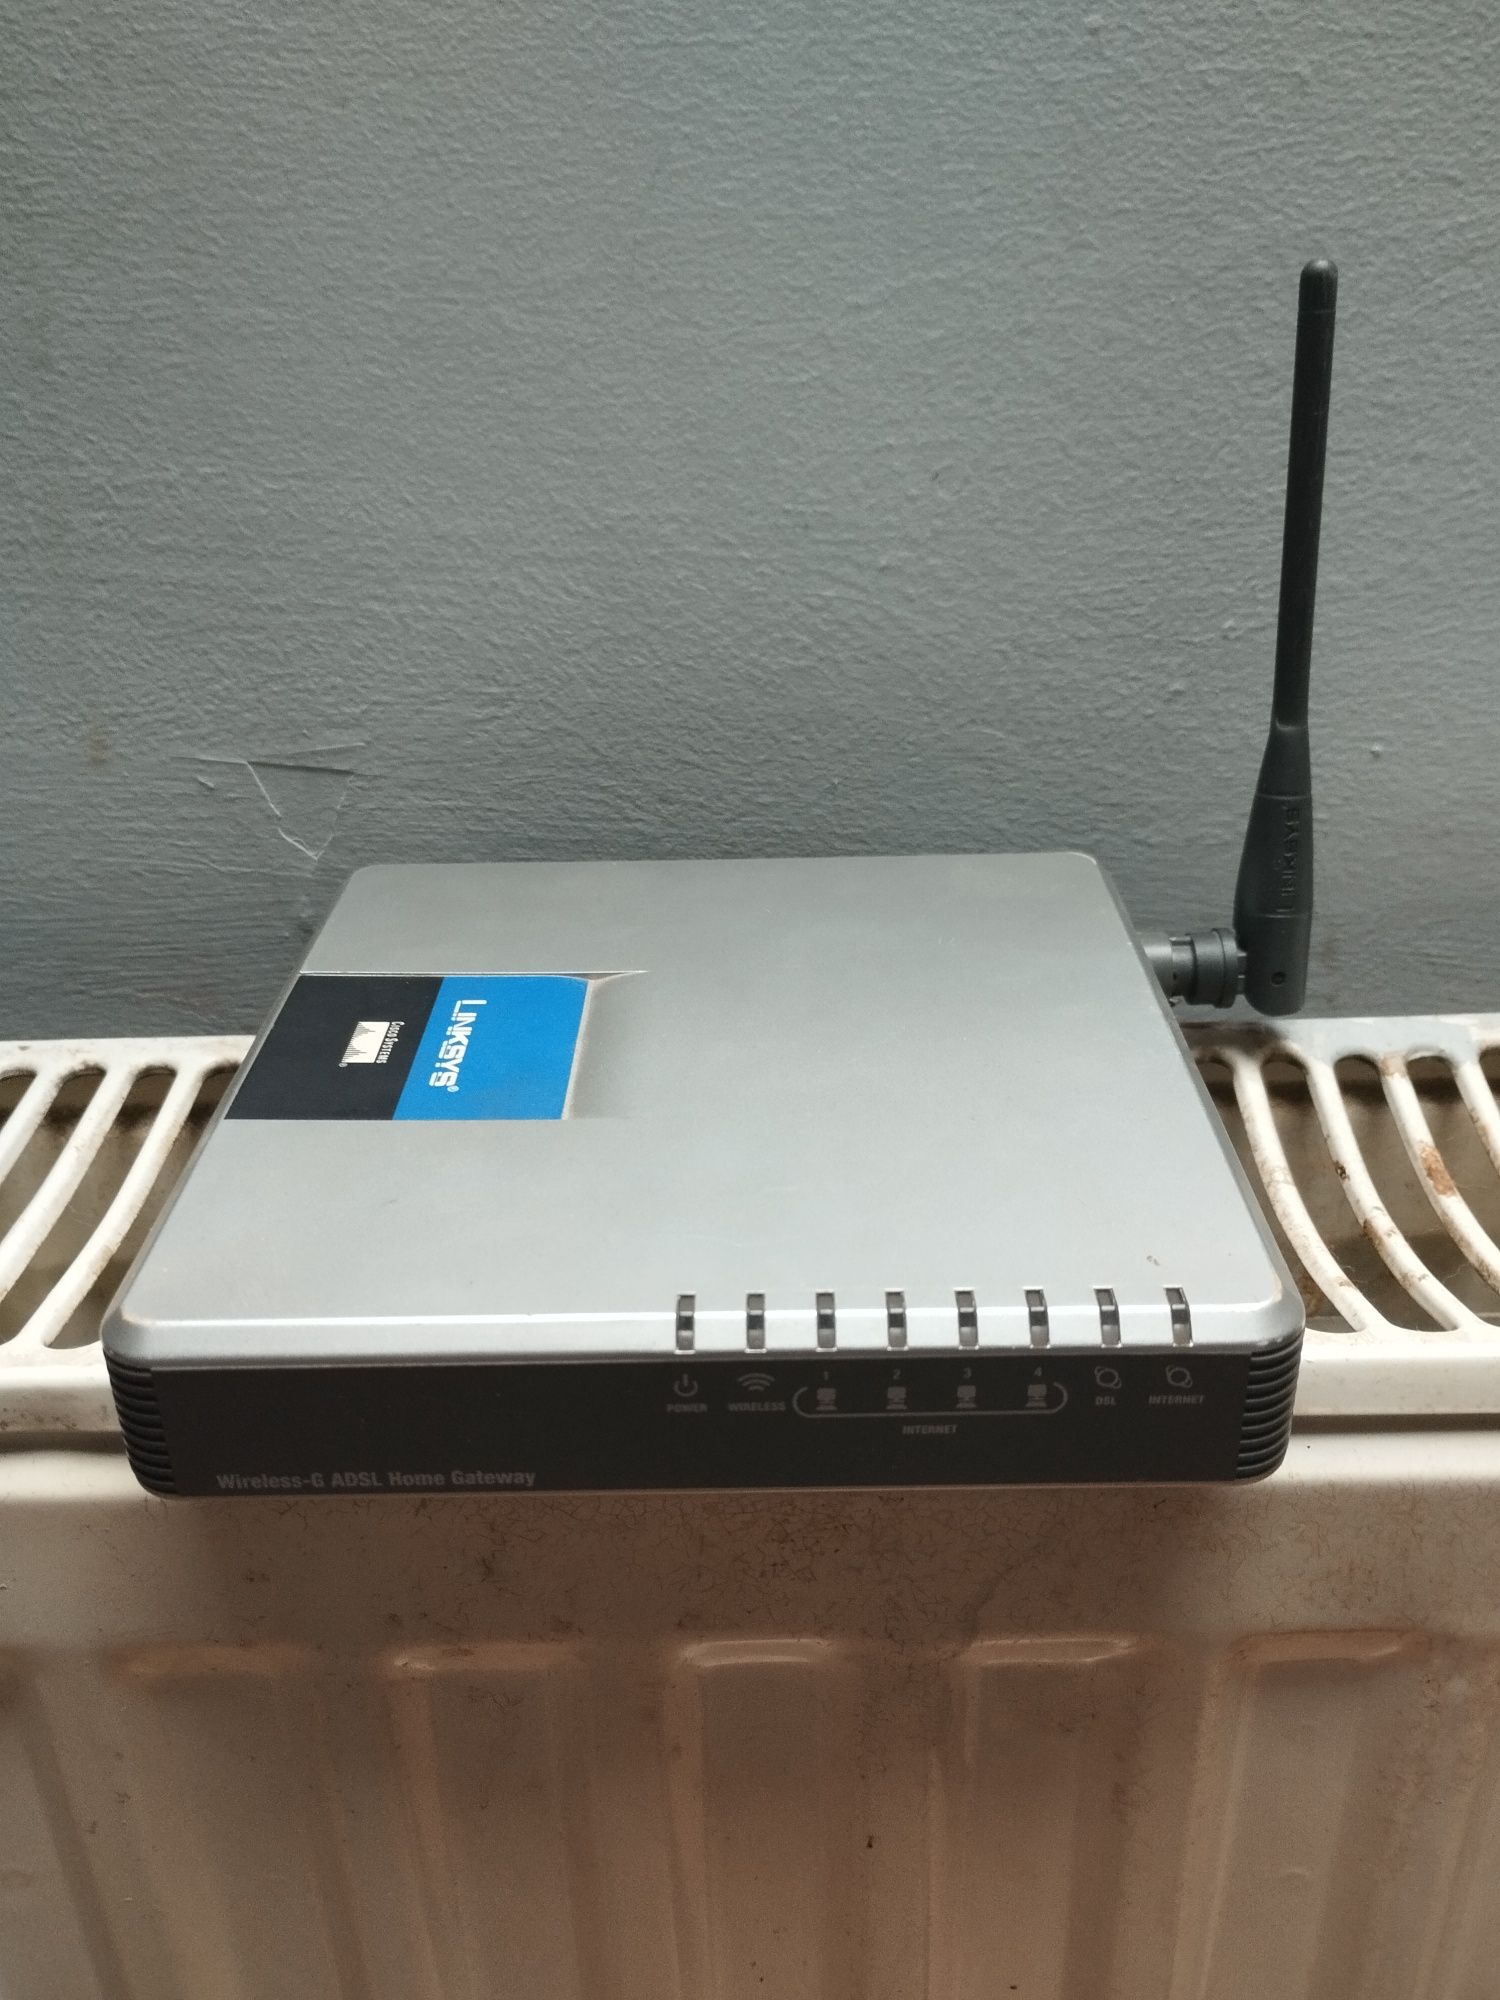 Router Linksys wag200g